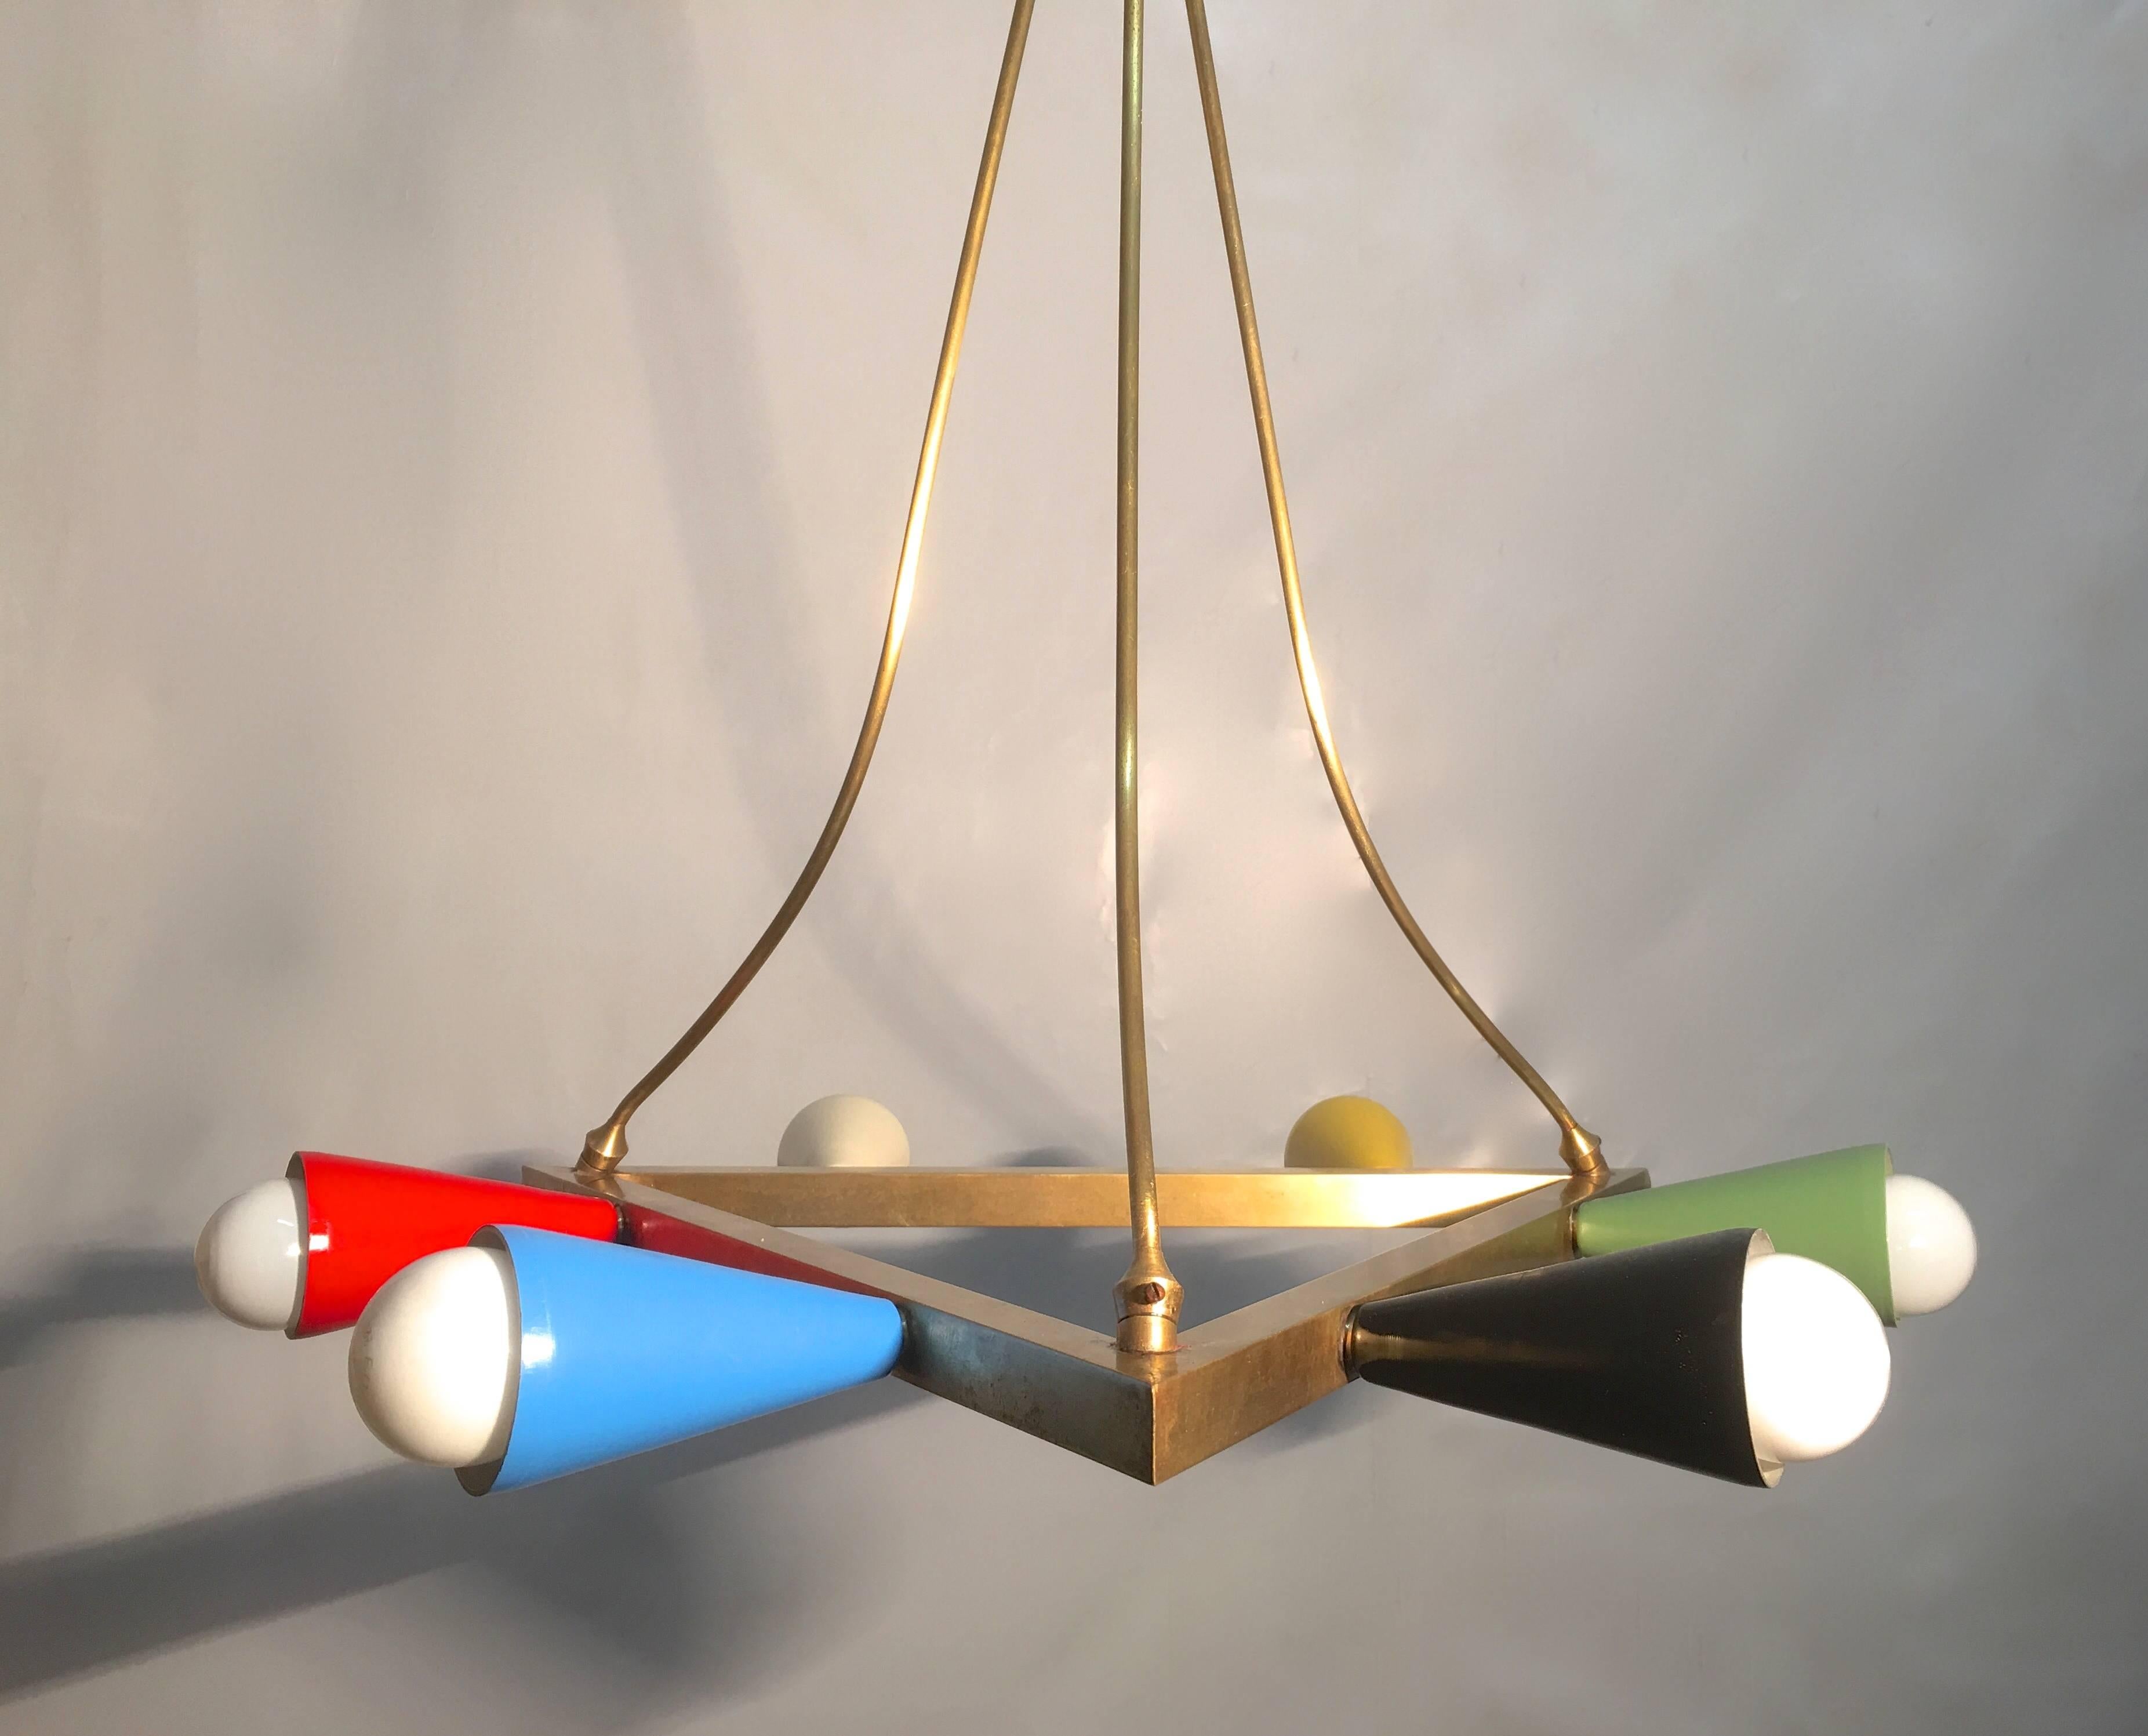 Unusual chandelier with a centre brass triangle on which colored sconces are mounted. Suspended from brass arms that appear to be hanging loosely from its center canopy held by a straight rod and ceiling canopy, this chandelier has many interesting